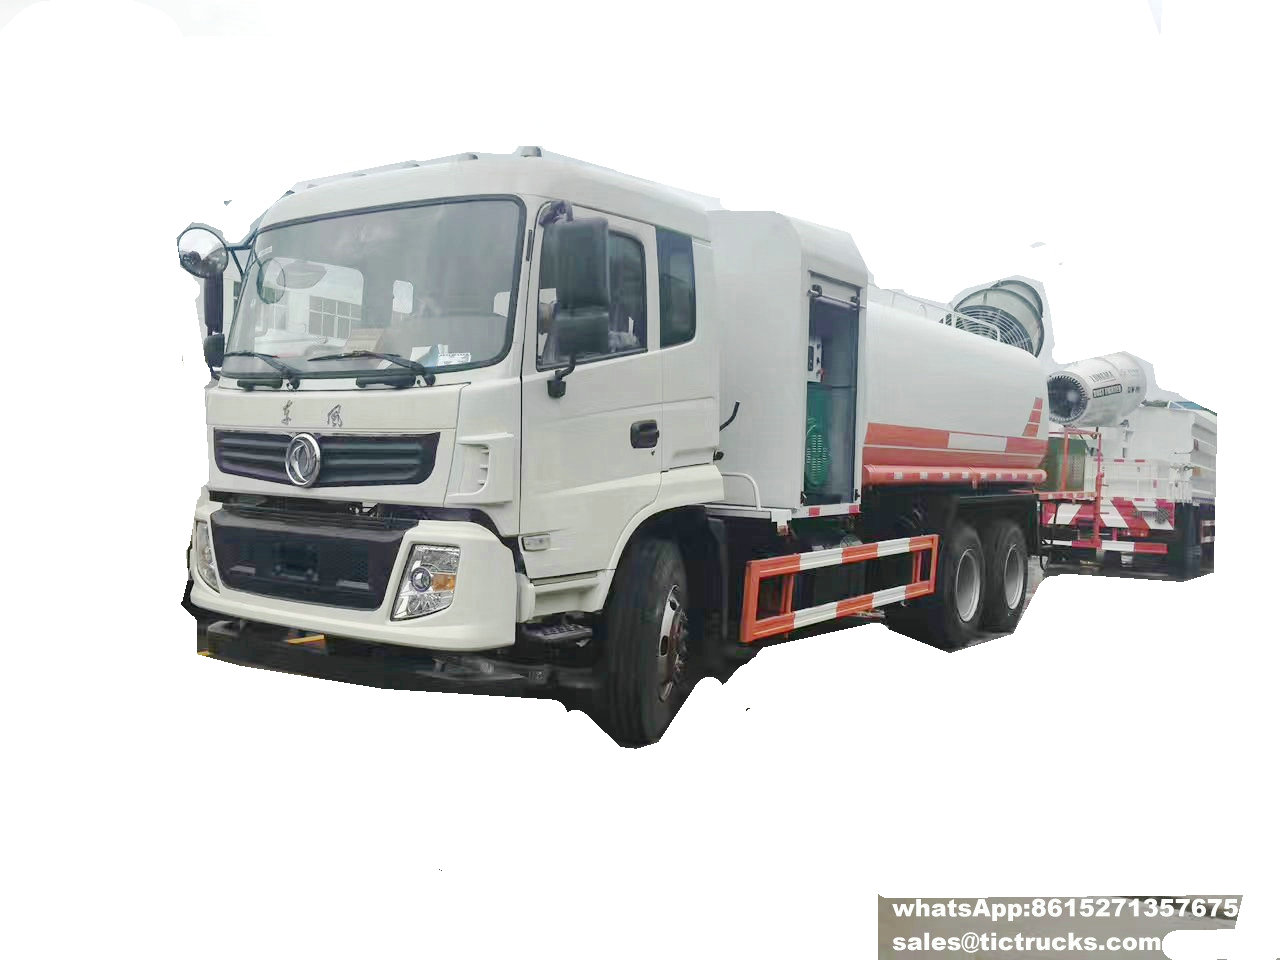 15000L DONGFENG 10 wheels Muti-function Dust Control water Truck